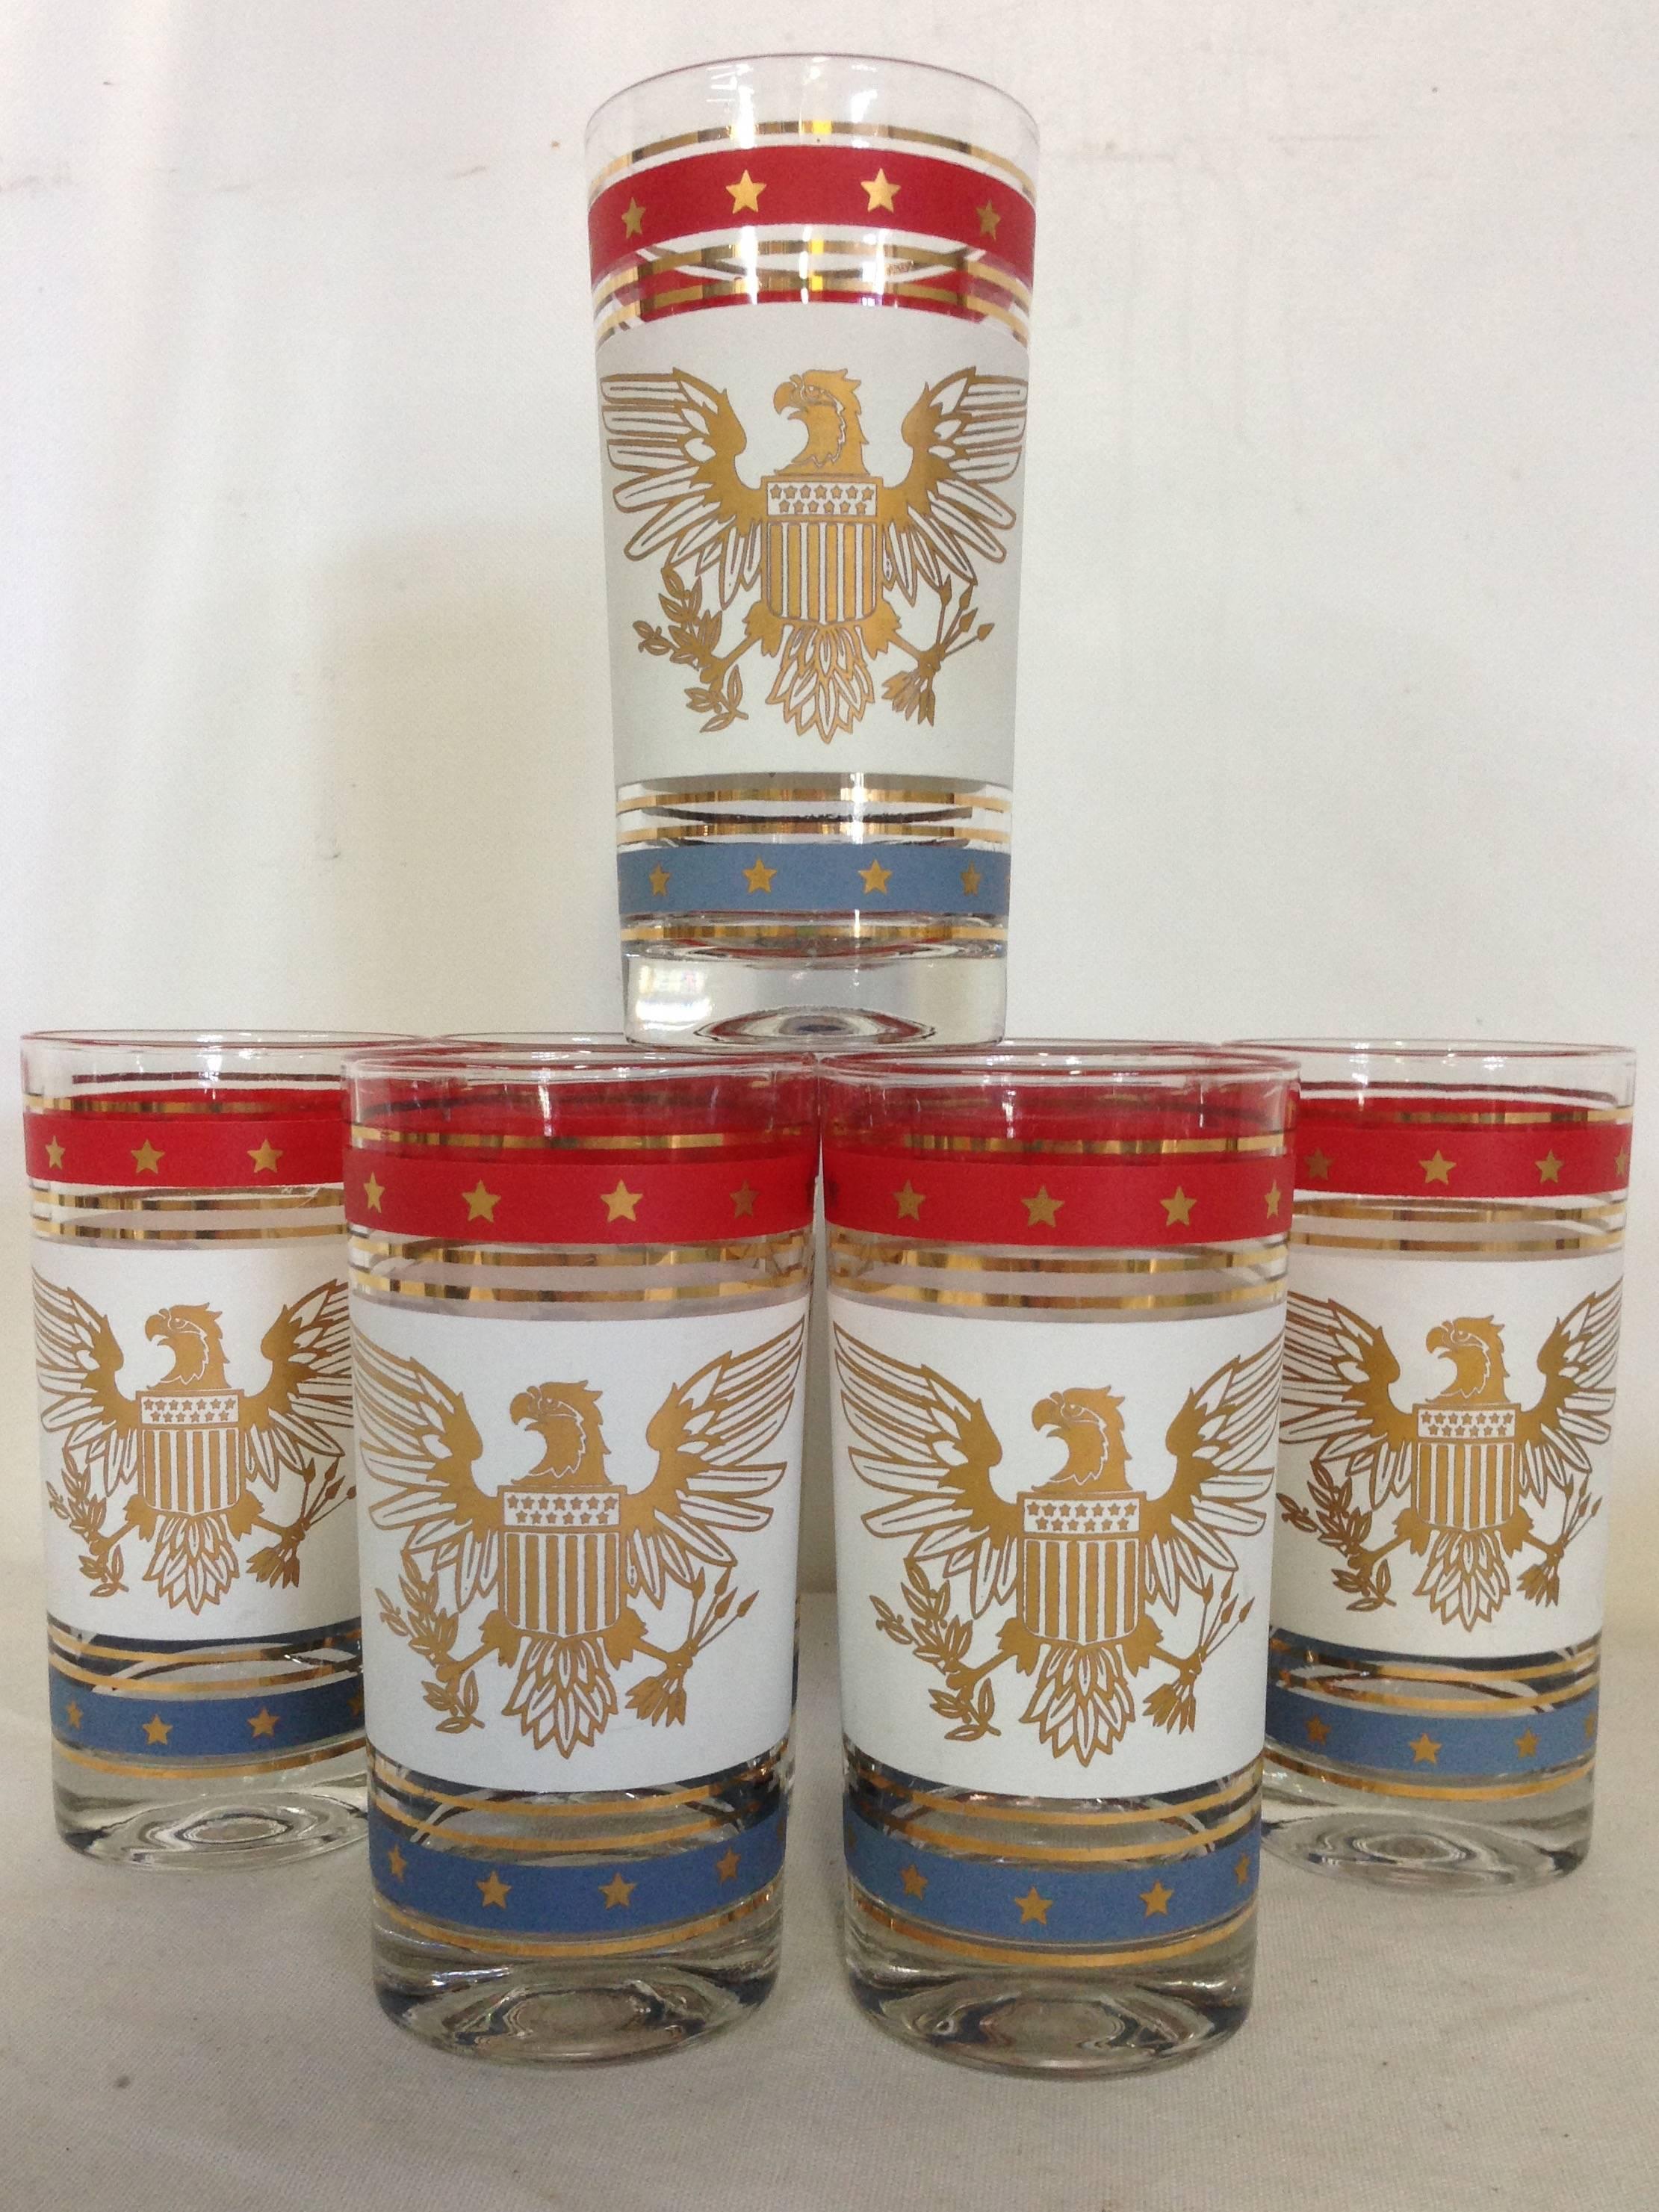 Set of seven vintage red, white, blue and 22-karat gold hand-painted American bald eagle high ball glasses. No makers mark.